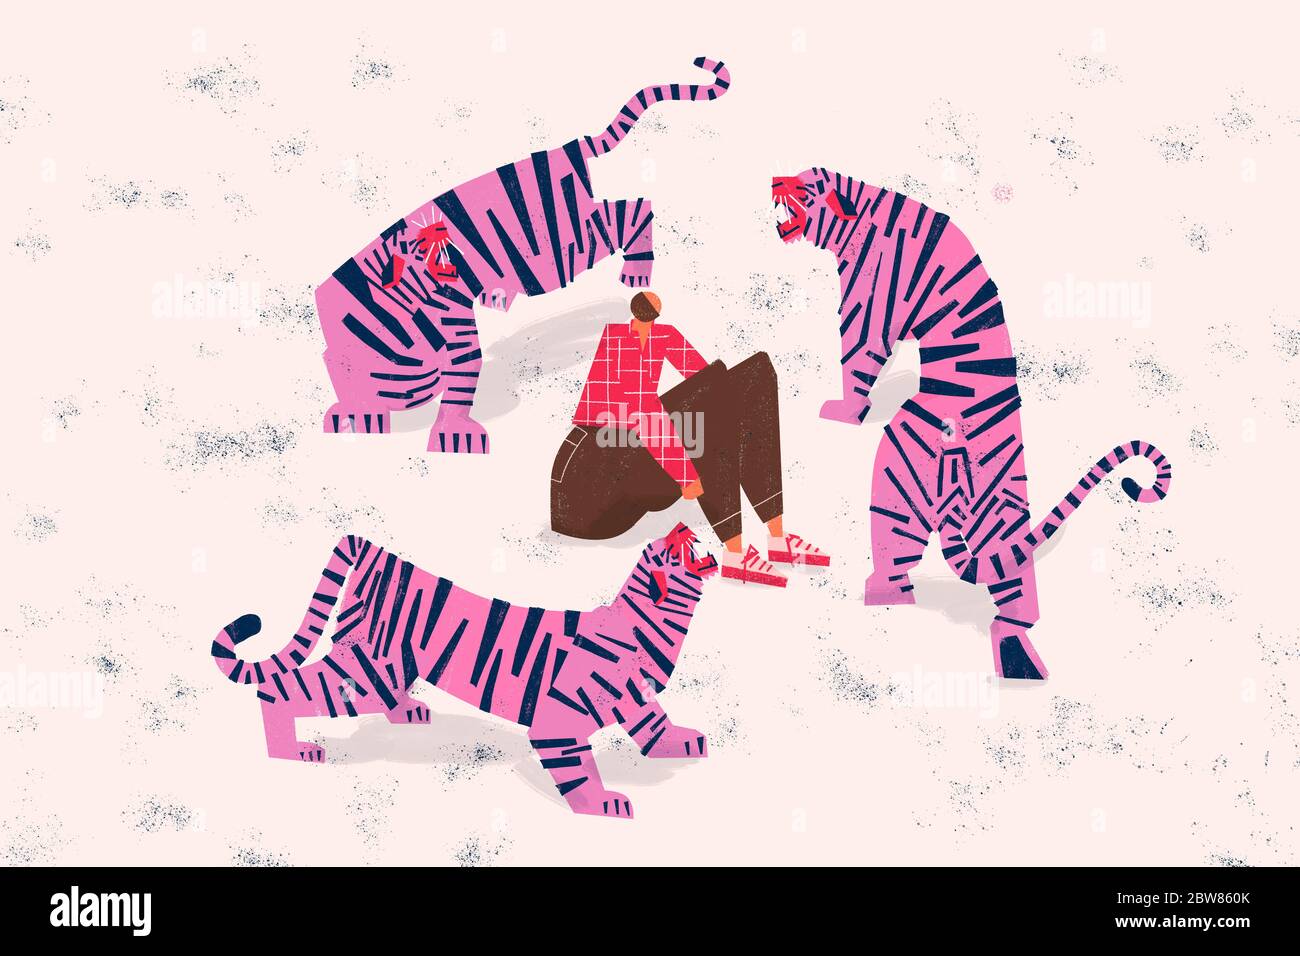 Anxiety disorder concept. Scared and anxious person surrounded by tigers. Social problematic. Colorful. Stock Photo